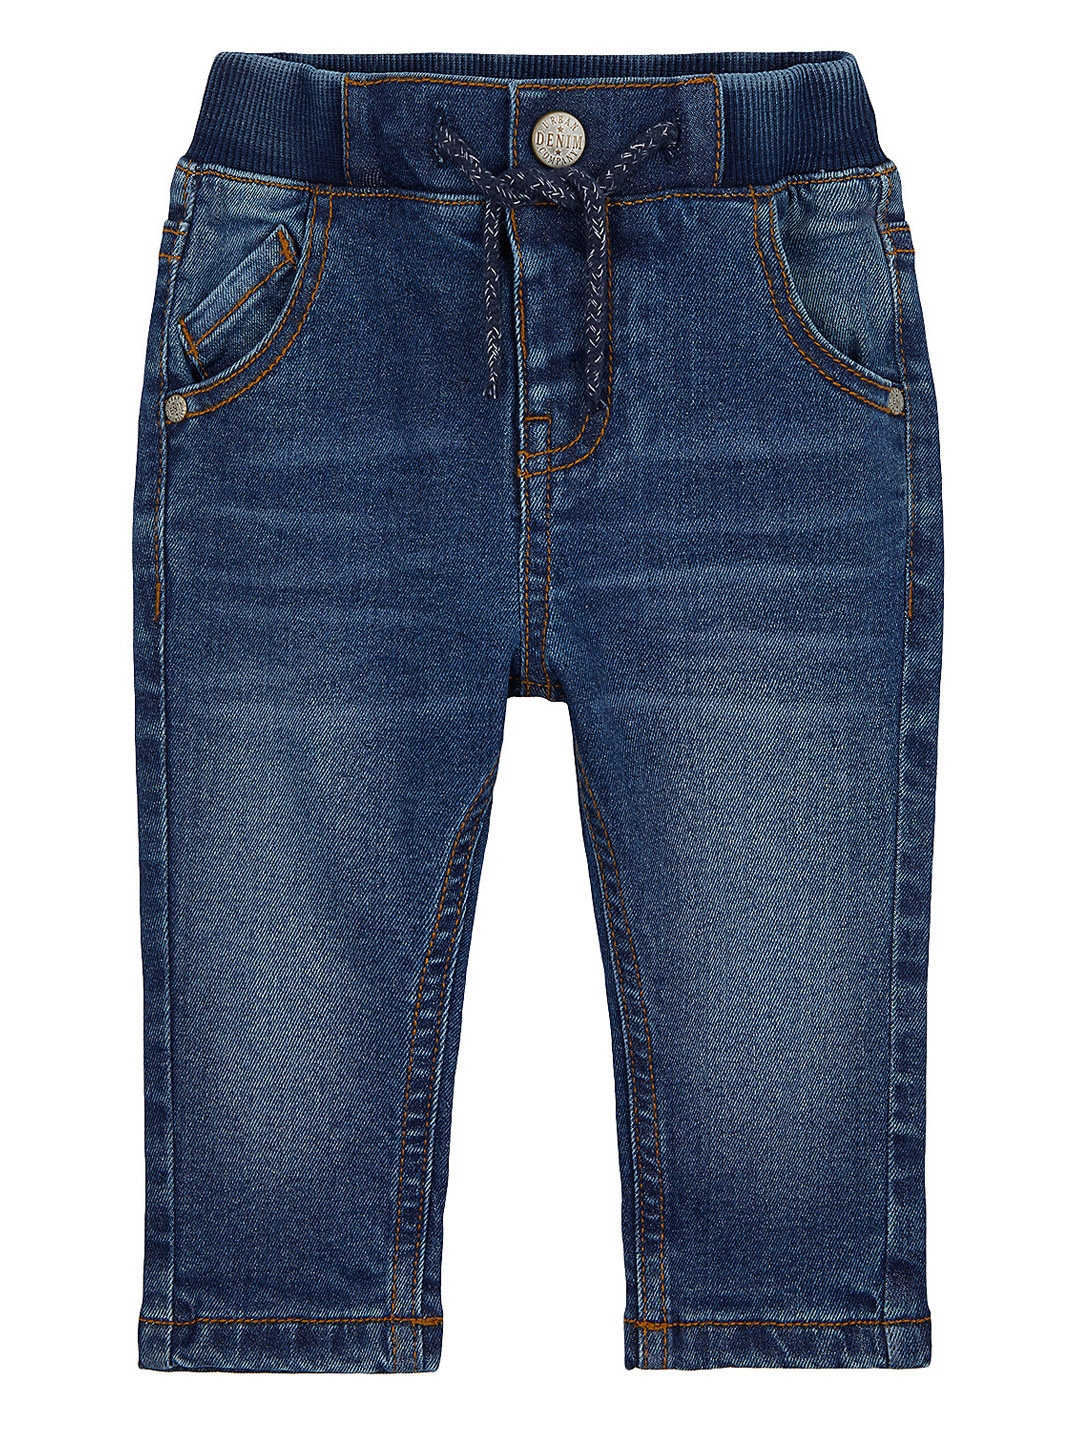 Buy Mothercare Boys Blue Washed Regular Fit Jeans - Jeans for Boys ...